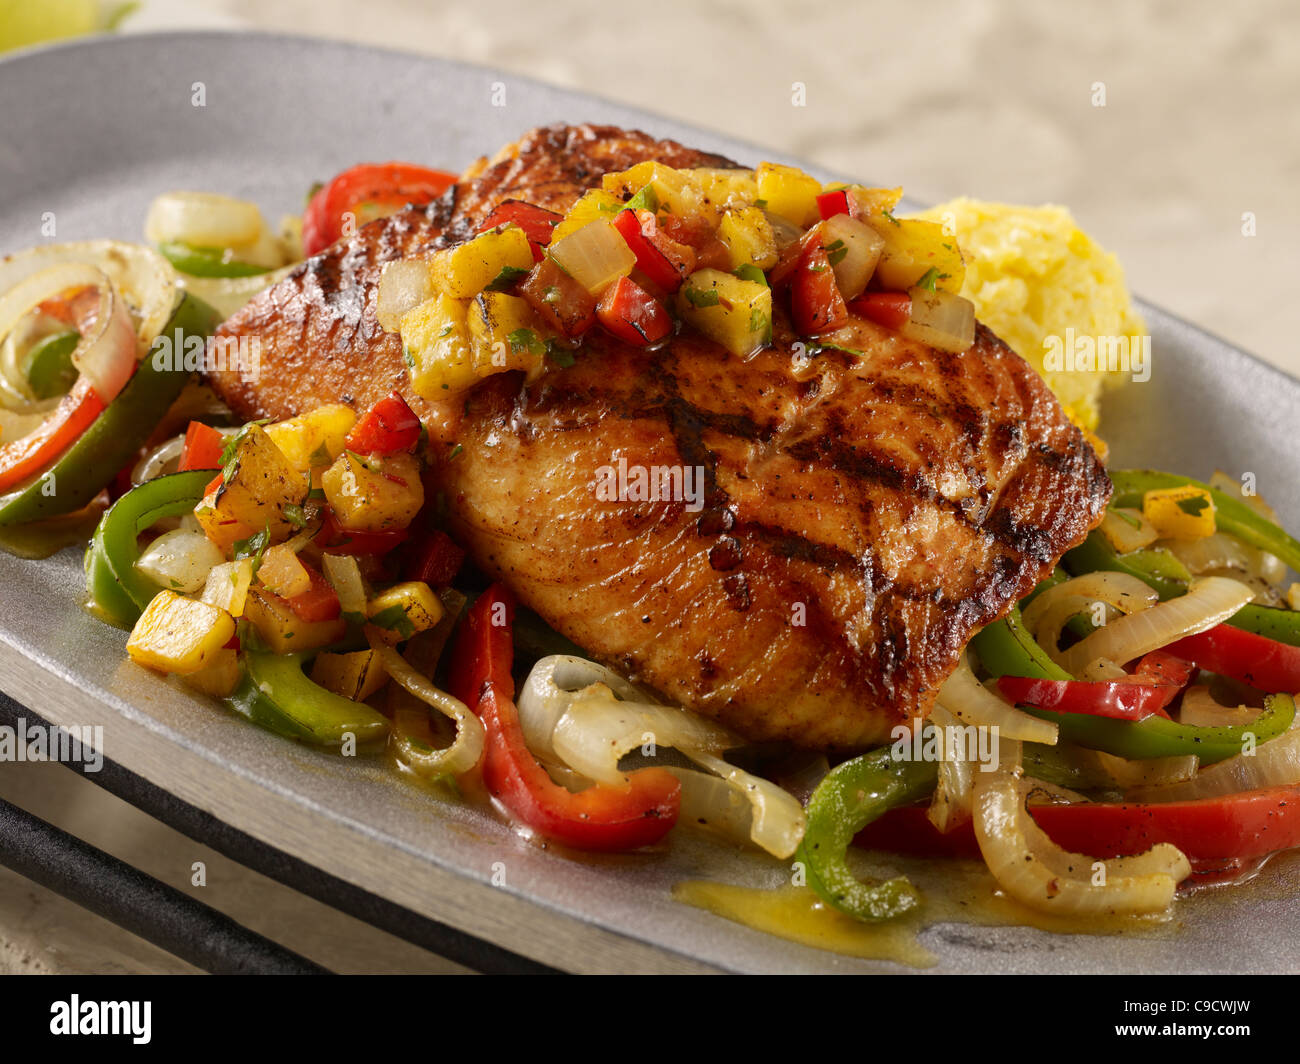 Grilled salmon fillet topped with pineapple salsa over fajita vegetables Stock Photo